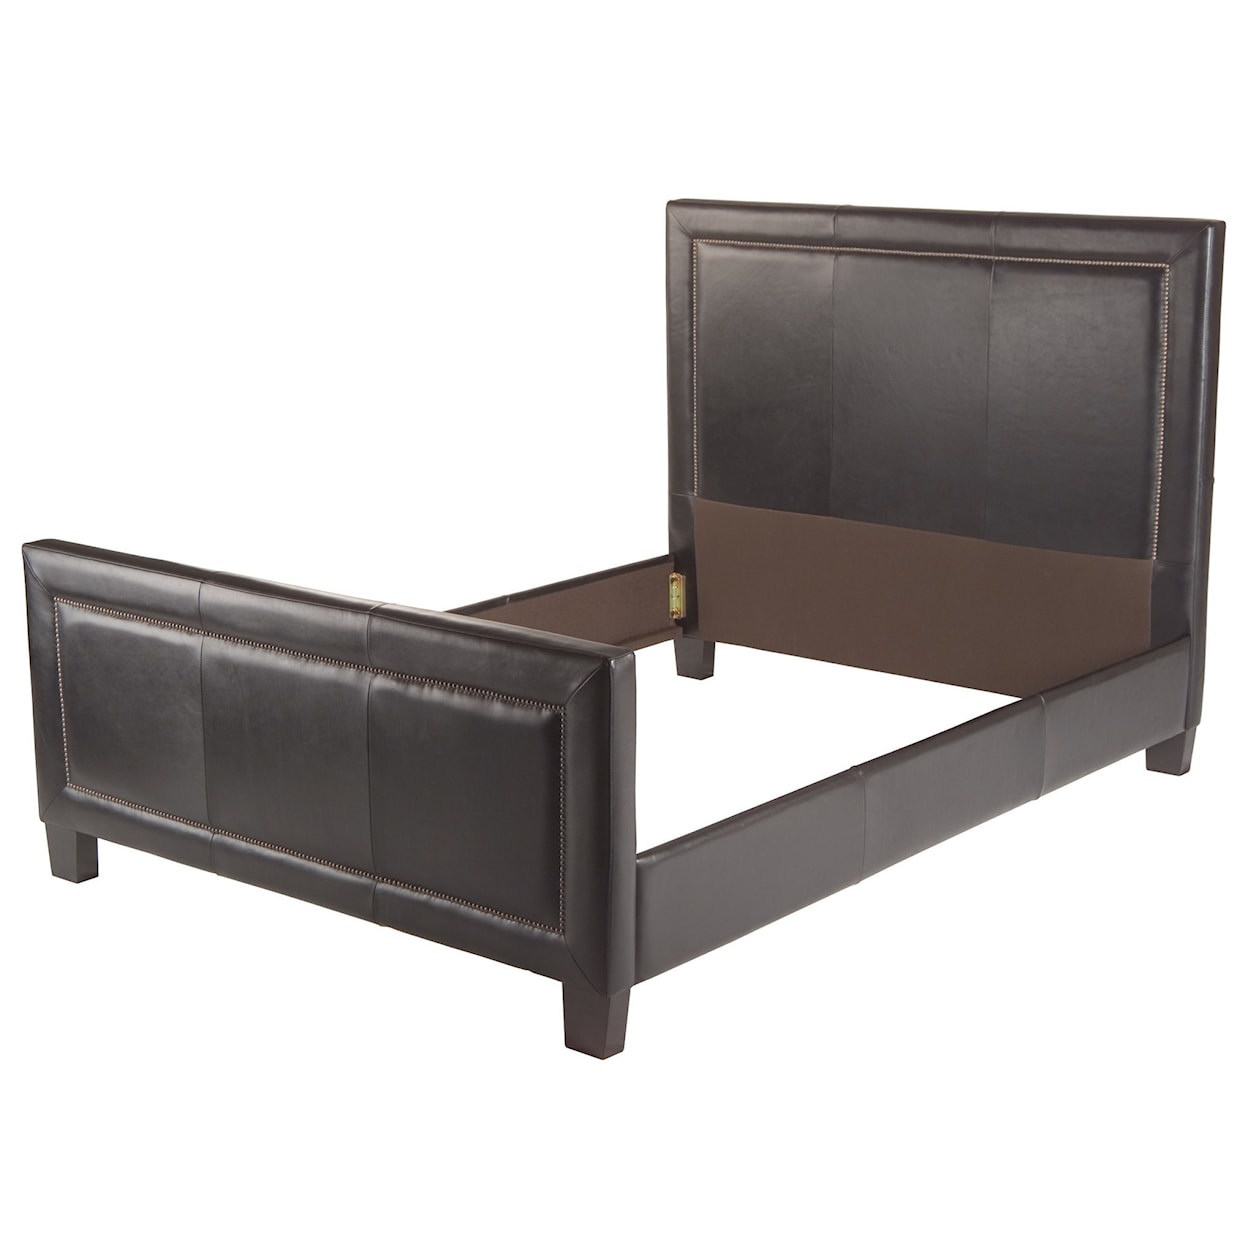 American Leather Copeland Upholstered Queen Bed